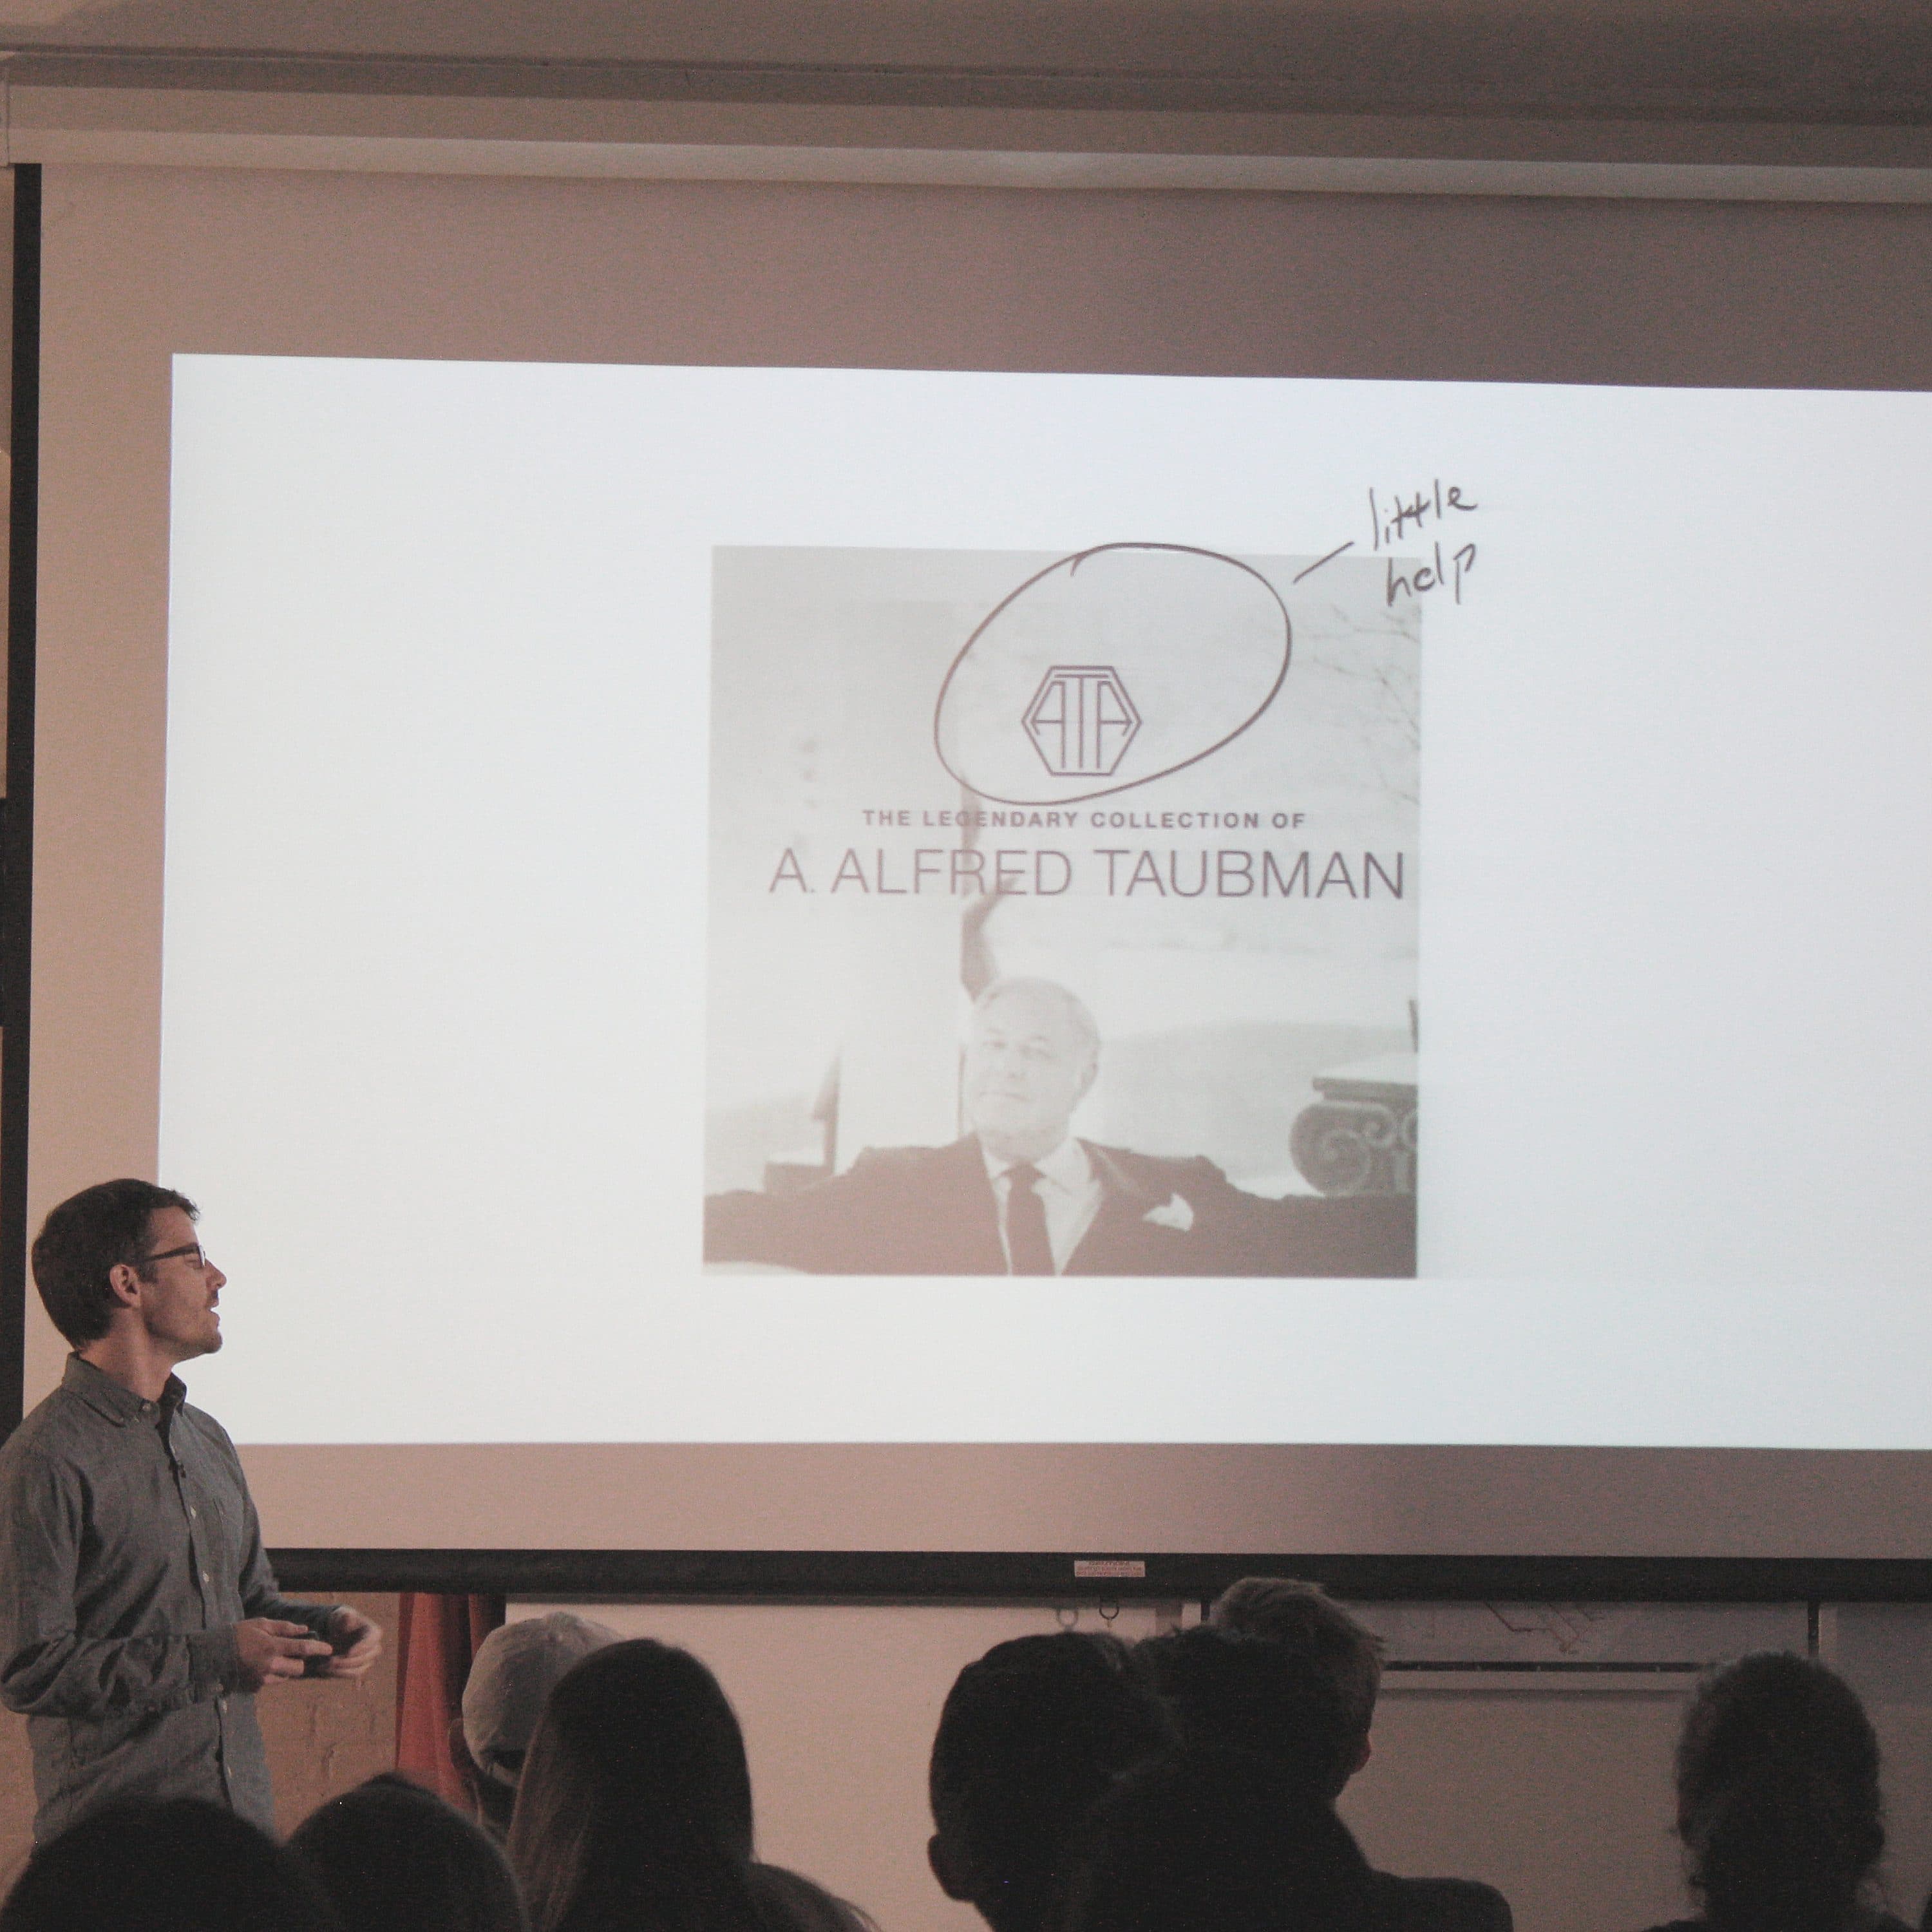 A man is standing in front of a projection screen, giving a presentation. The screen displays an image labeled "The Legendary Collection of A. Alfred Taubman." There are framed pictures on the wall behind him, and an audience is seated, watching the presentation.